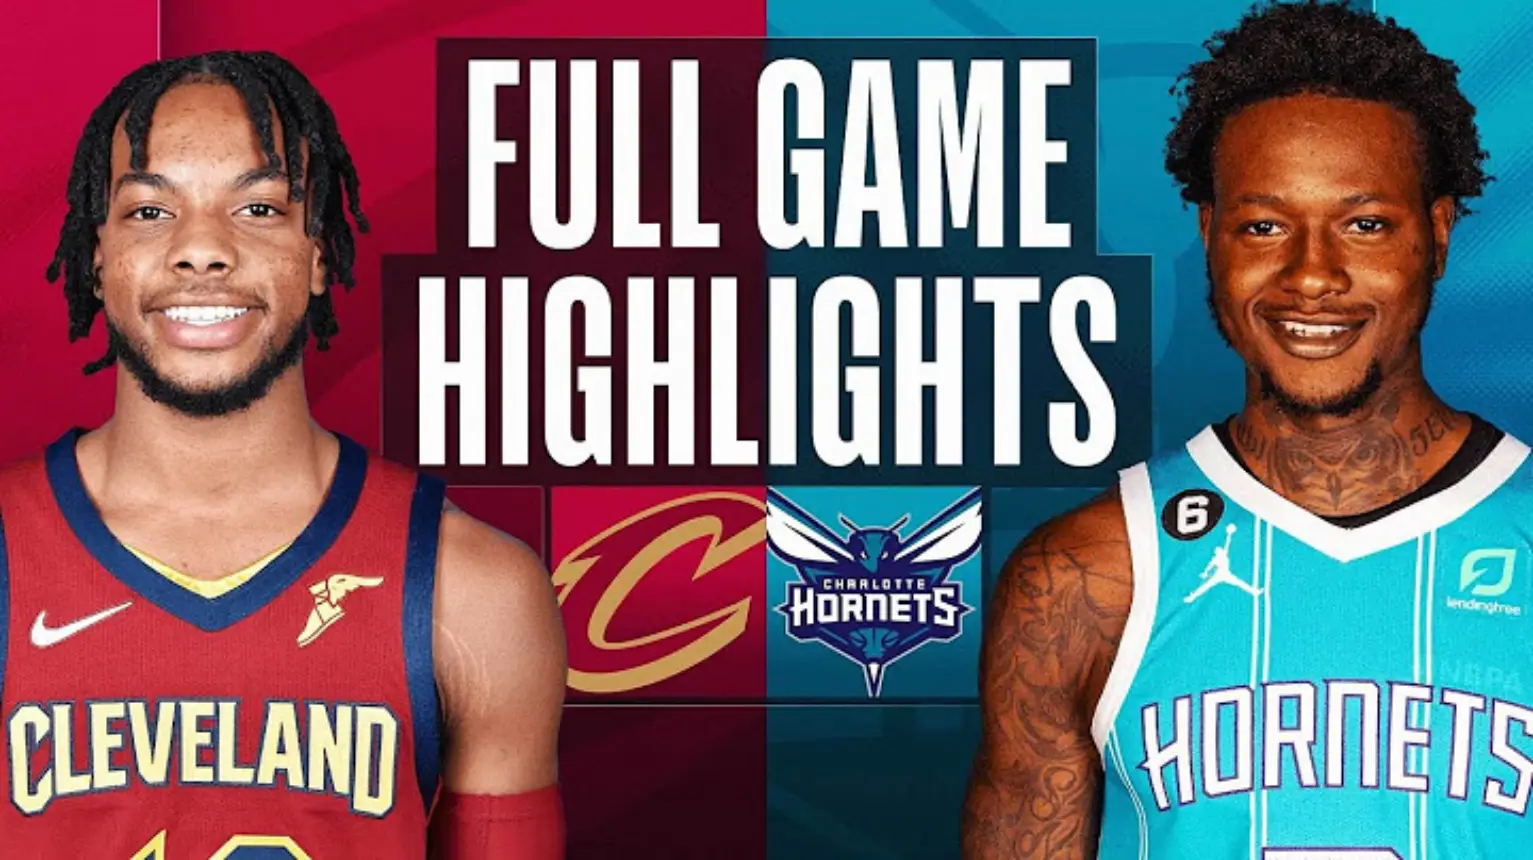 Free highlights Cleveland Cavaliers vs Charlotte Hornets